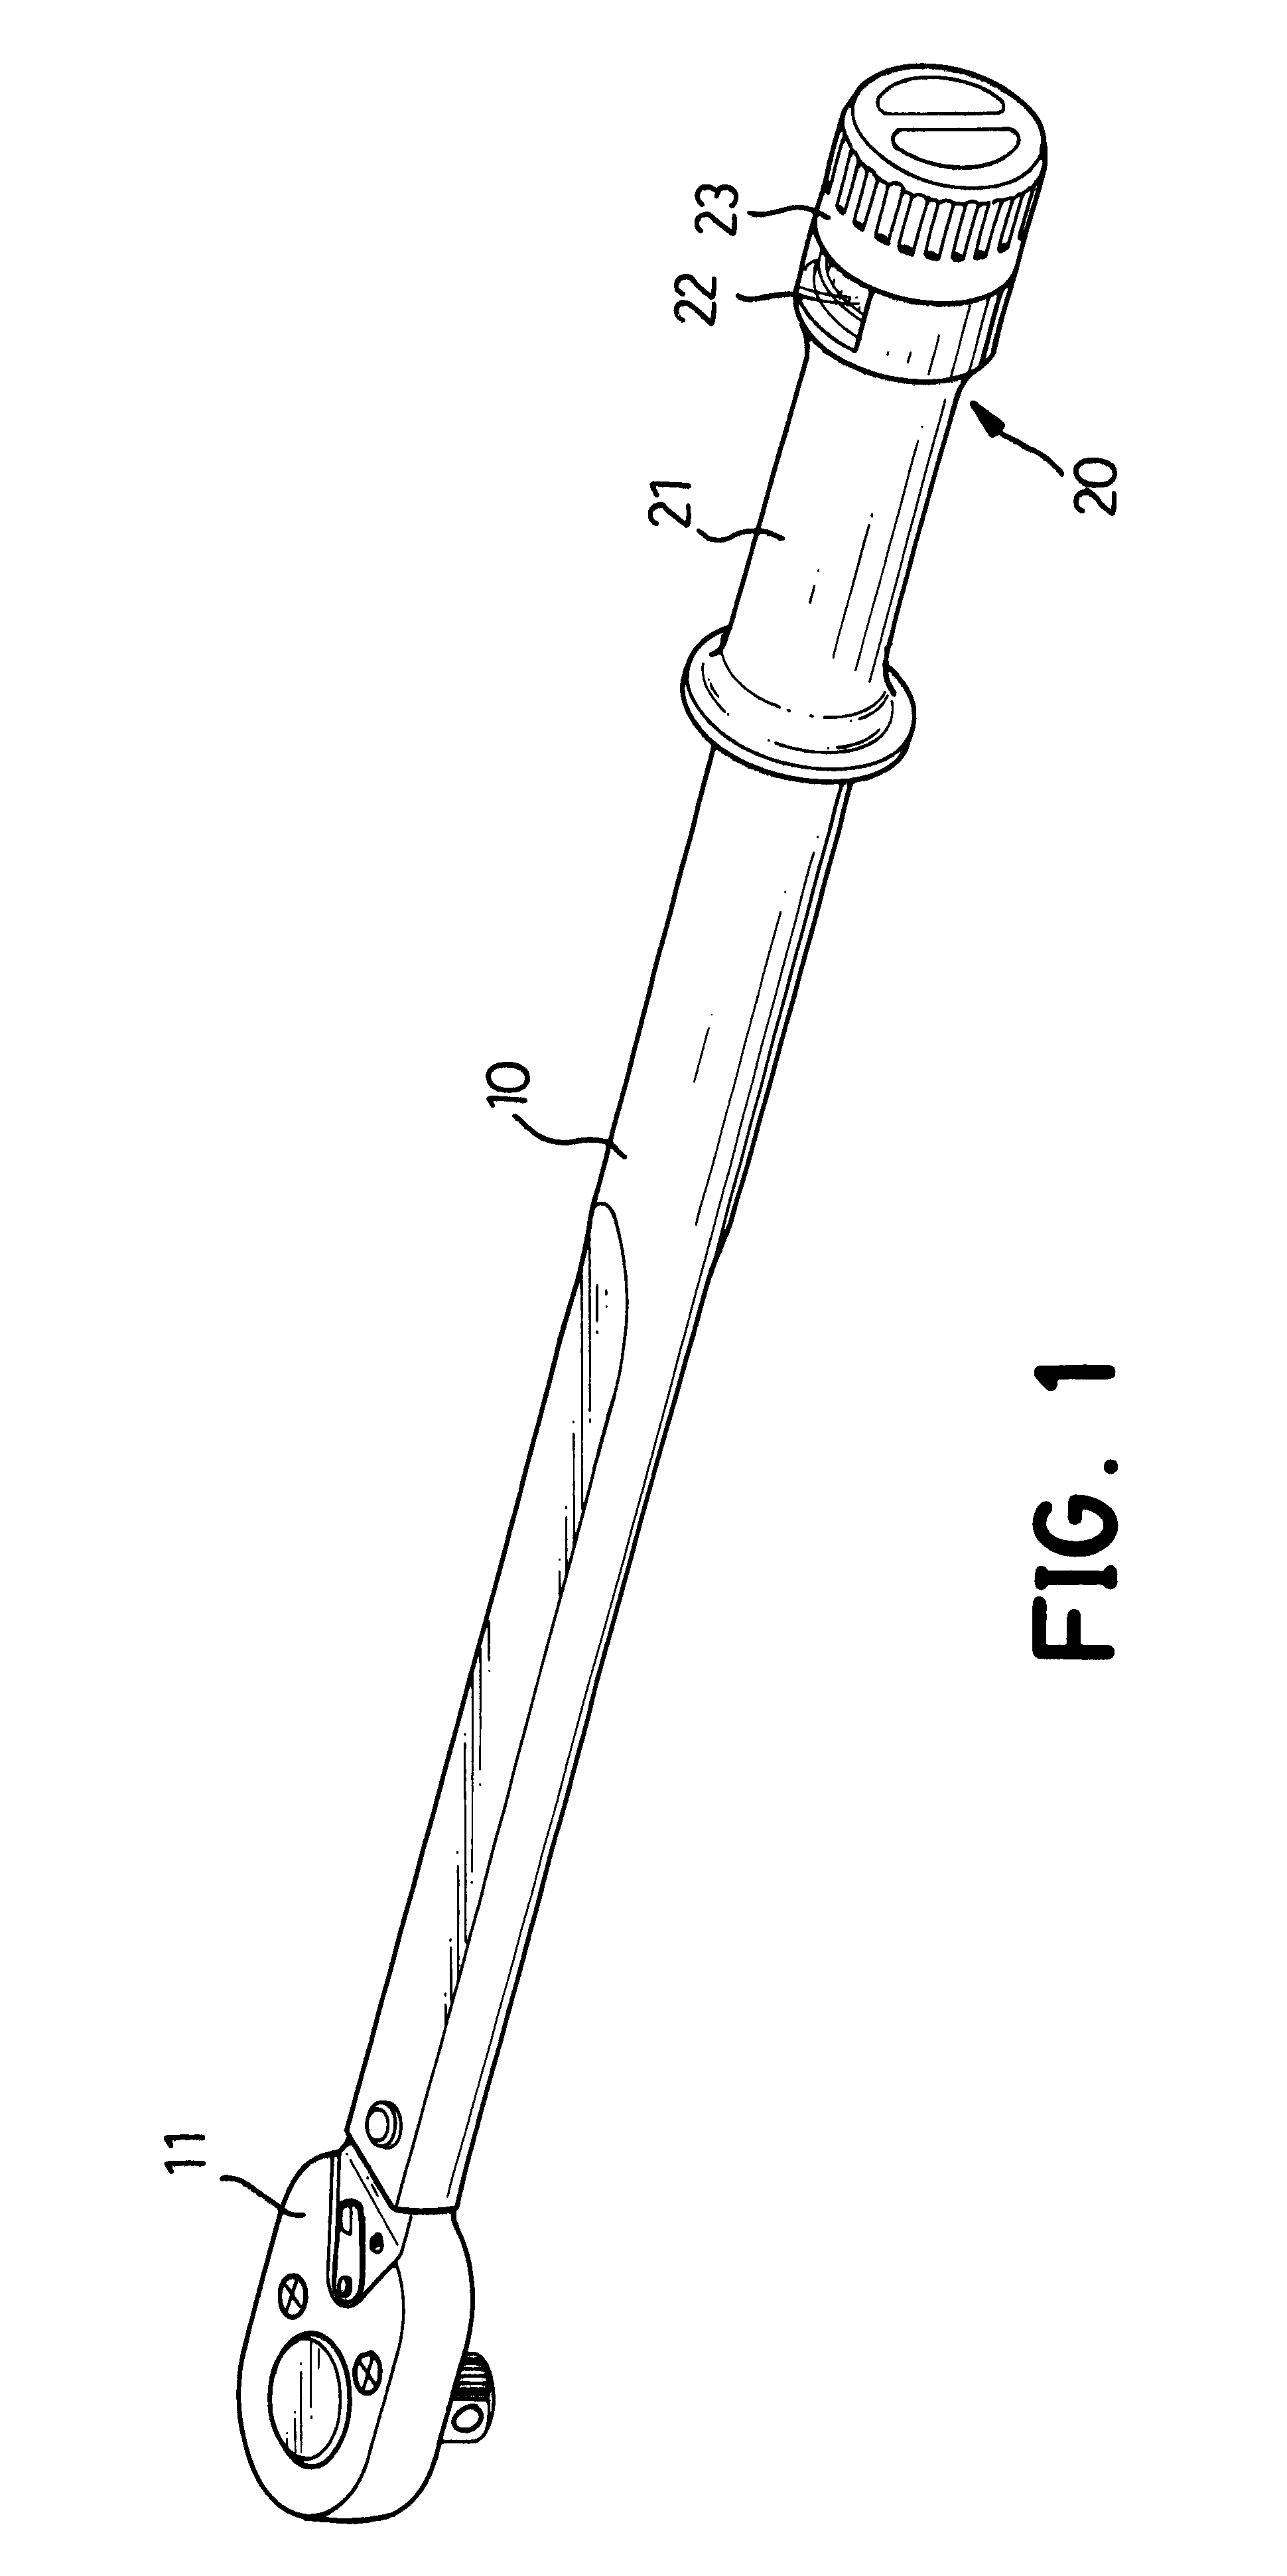 Torque wrench with a scale